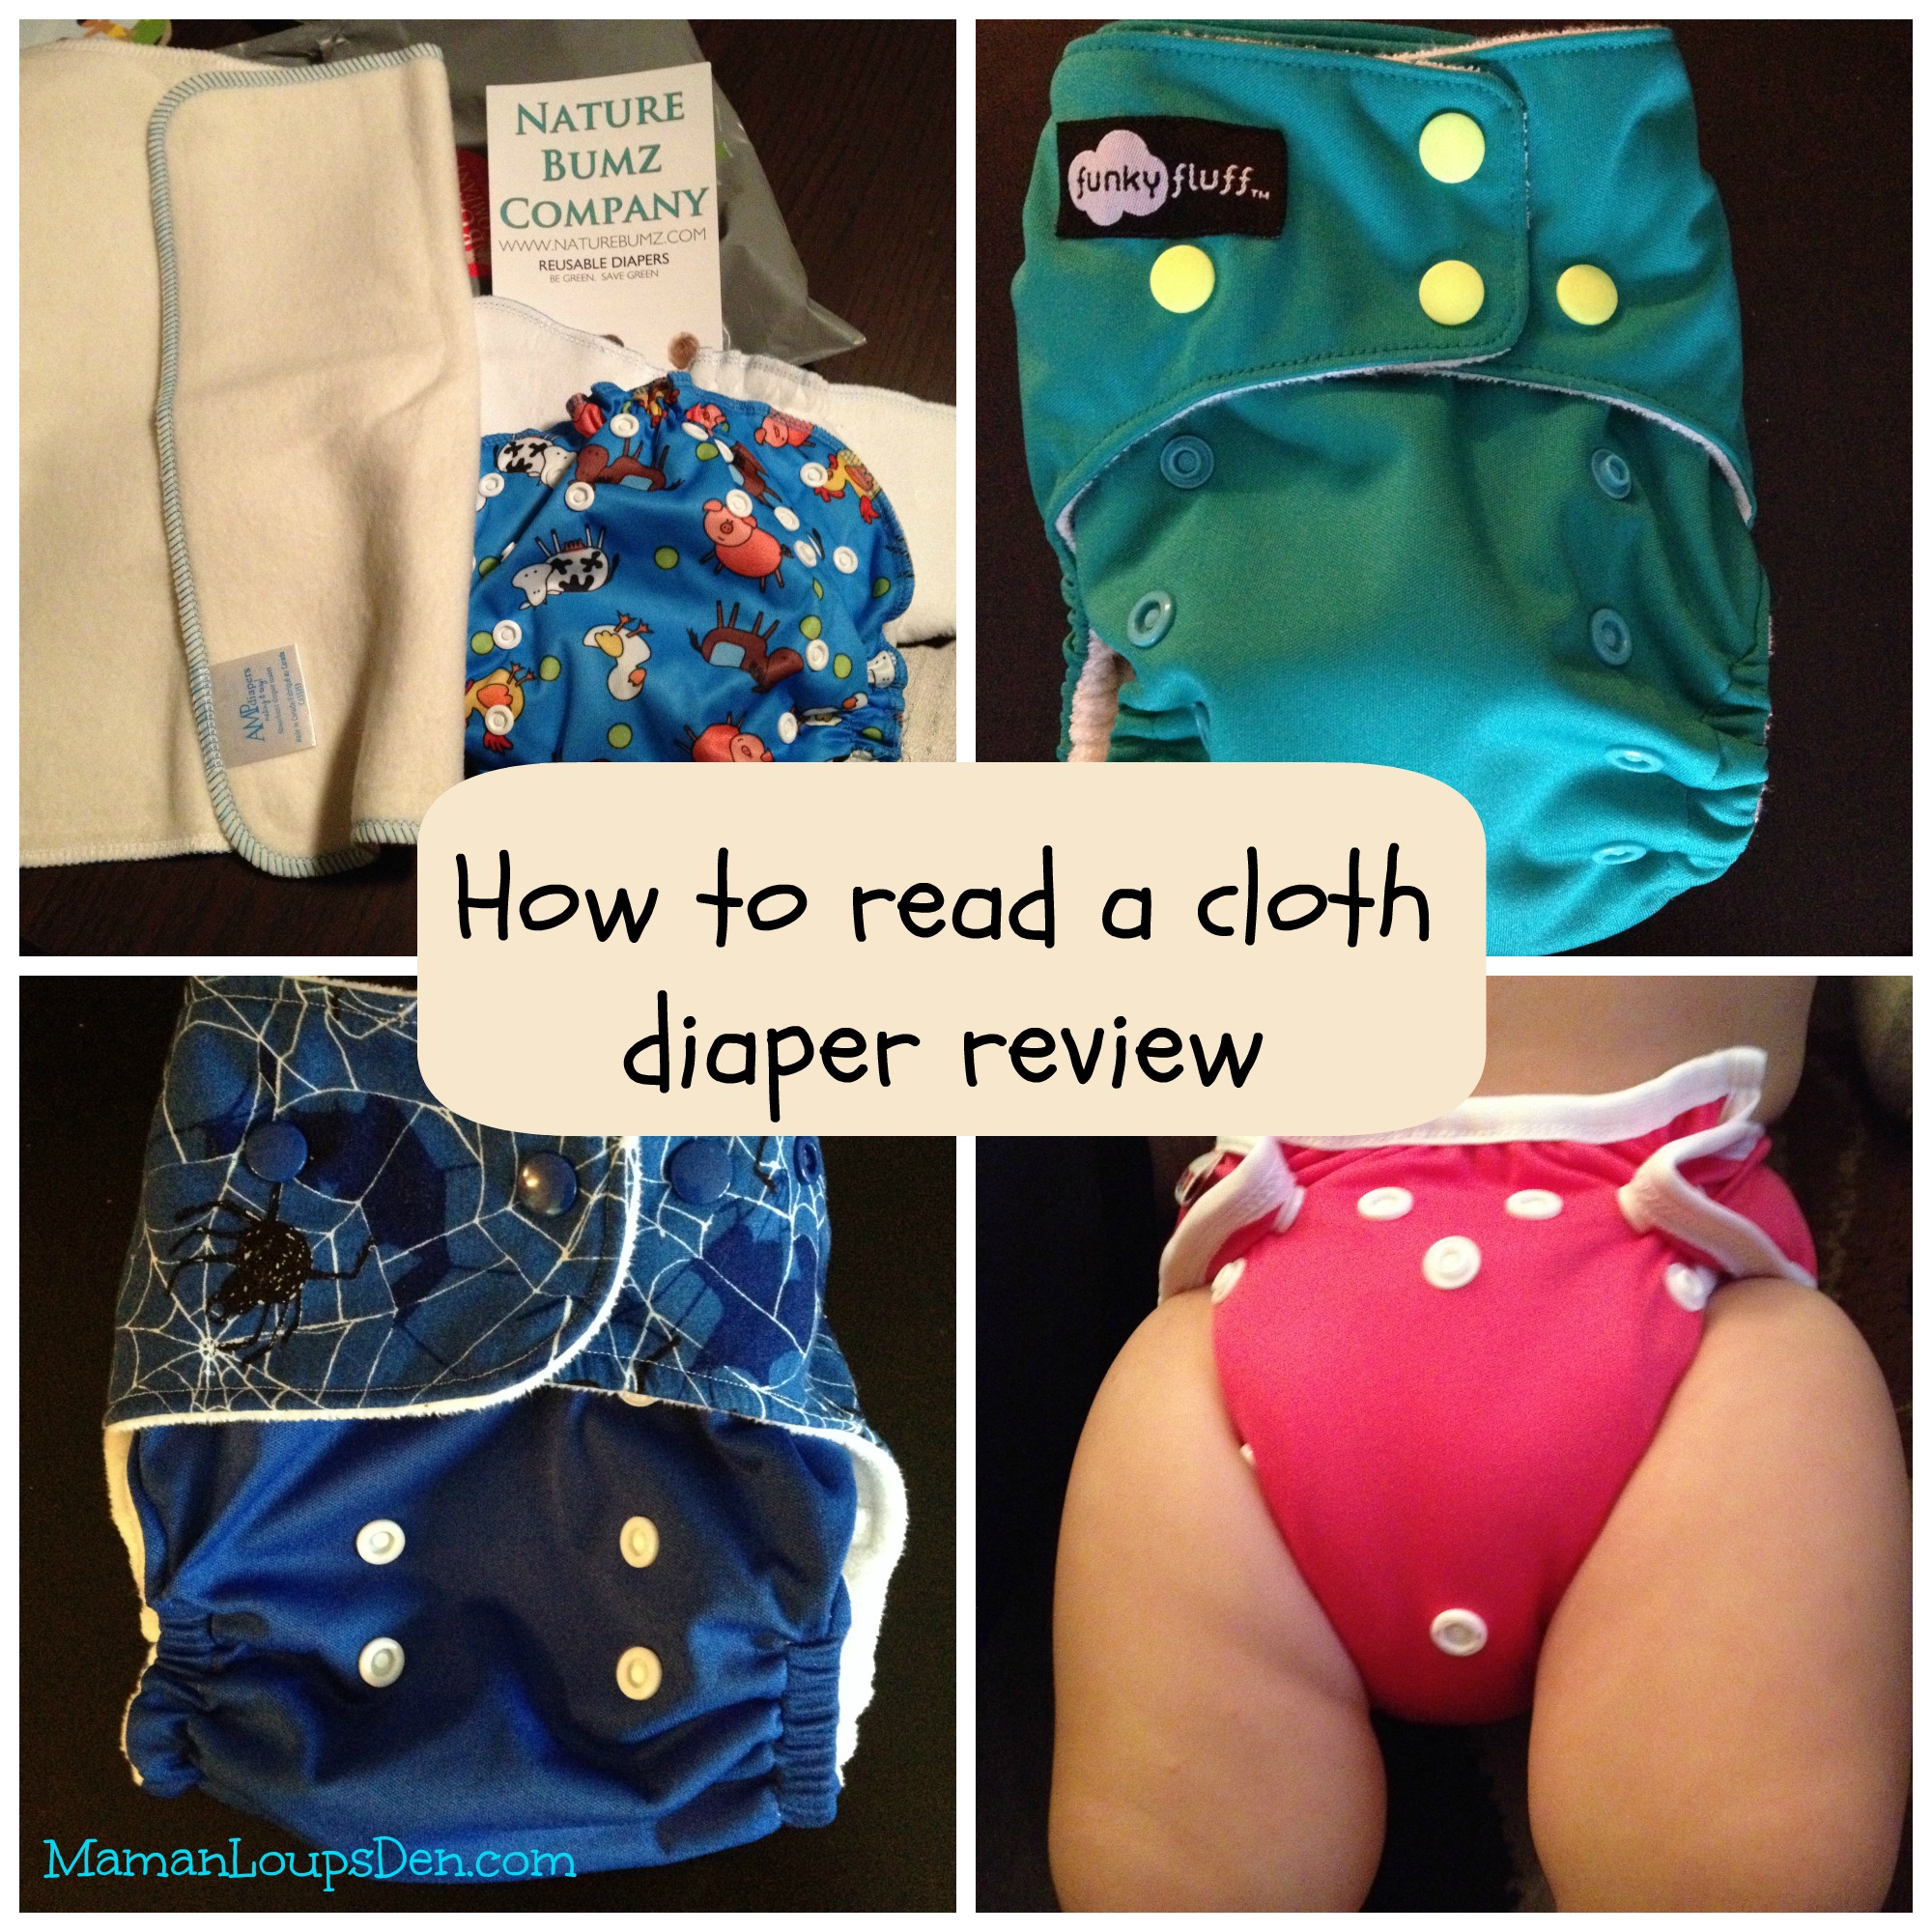 How to Read a Cloth Diaper Review